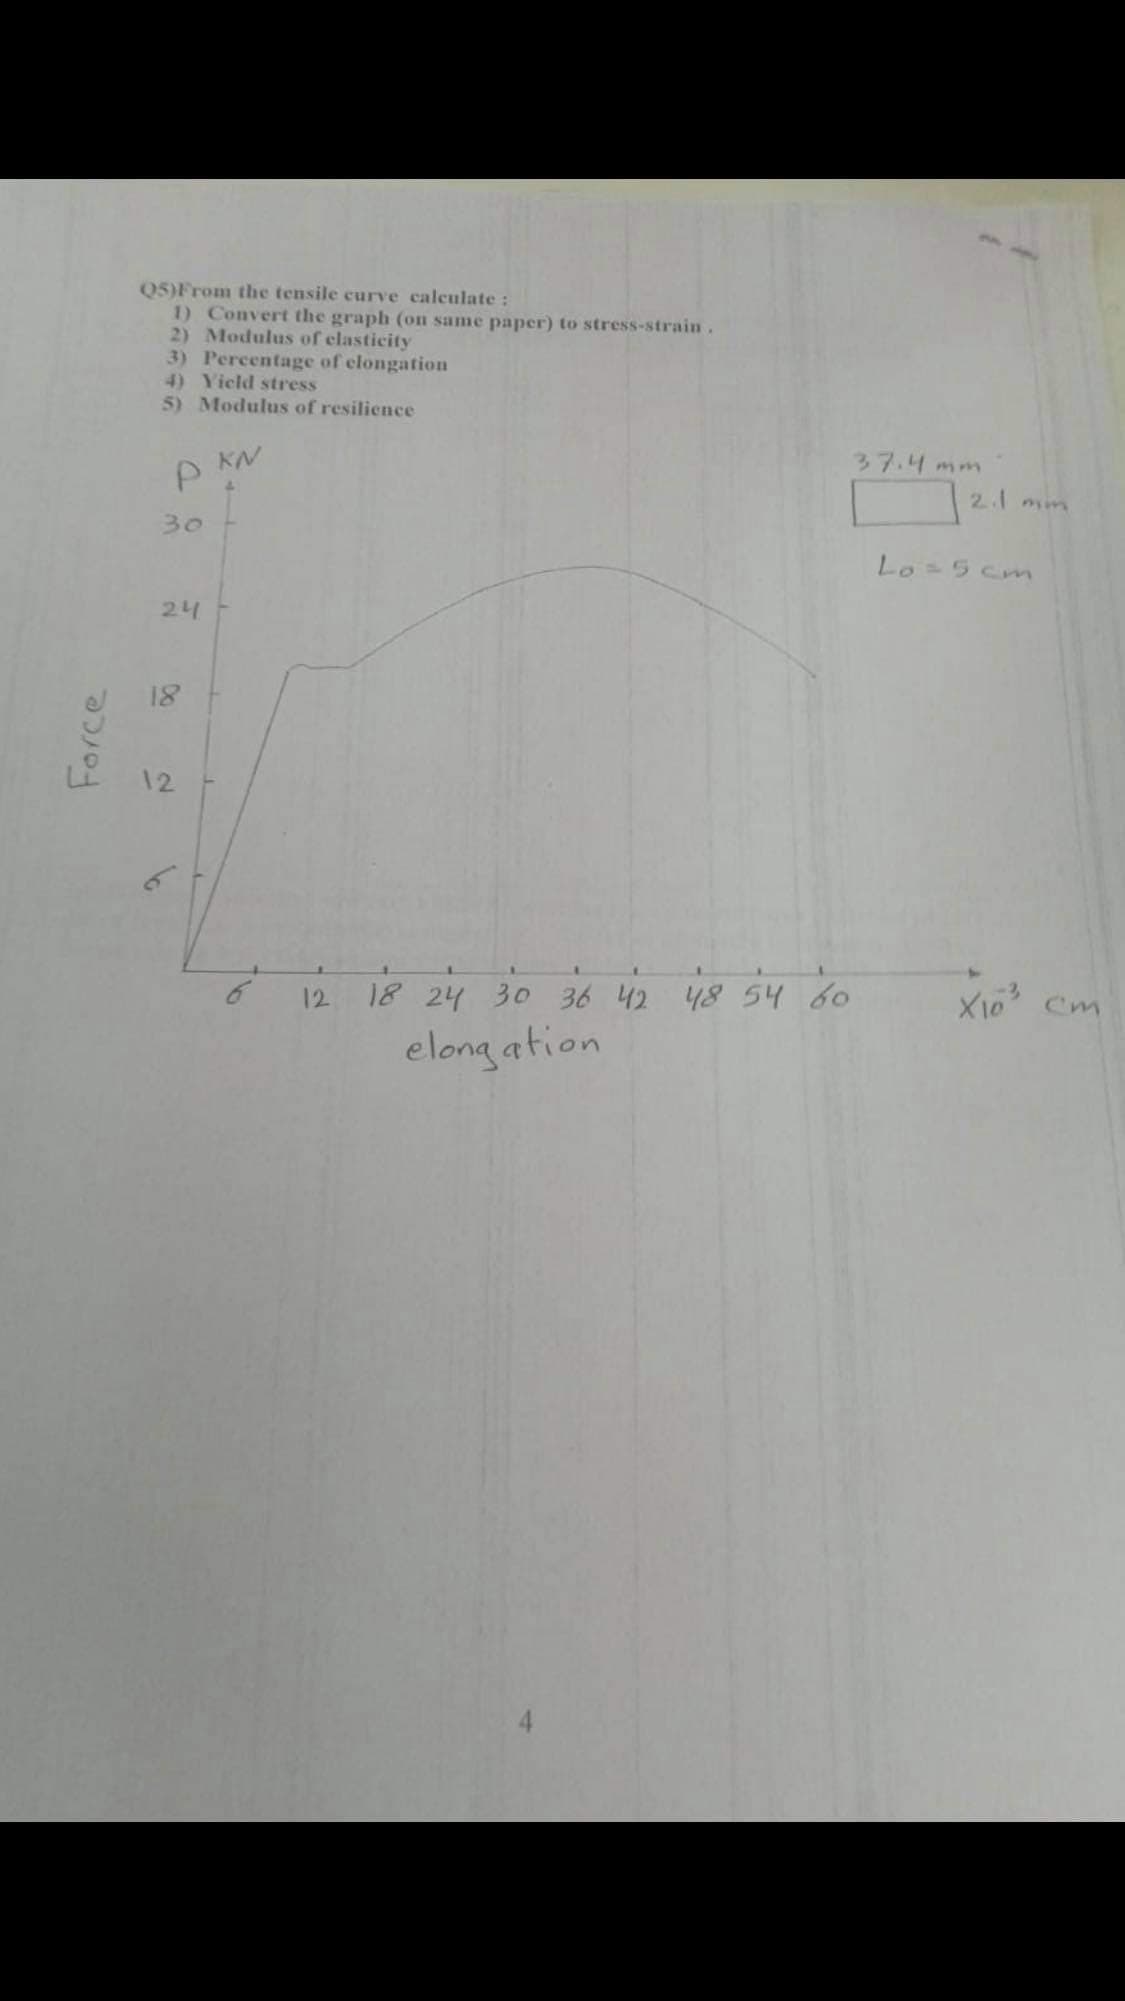 Q5)From the tensile curve calculate:
1) Convert the graph (on same paper) to stress-strain.
2) Modulus of clasticity
3) Percentage of elongation
4) Yicld stress
5) Modulus of resilience
37.4mm
2.1 mim
30
Lo=5 cmn
24
18
12
18 24
30
36 42 48 54 60
12
Cm
elong ation
Force
